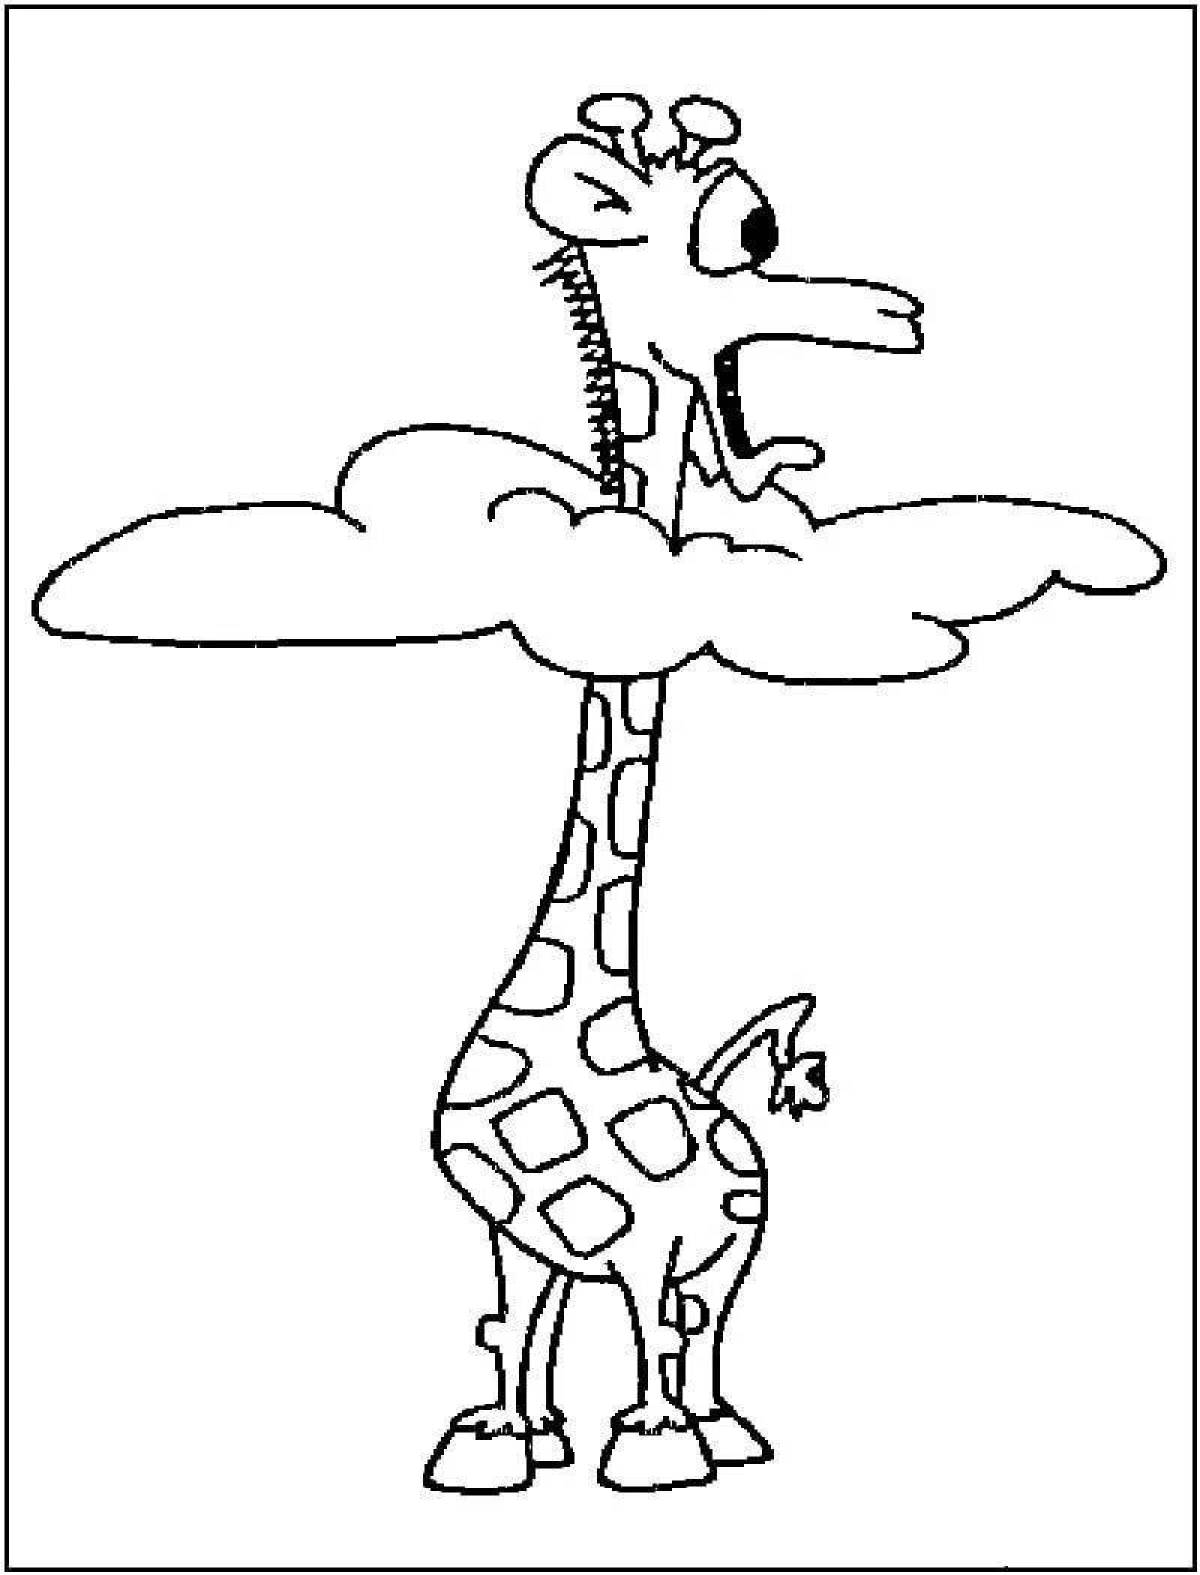 Glowing giraffe coloring page for kids